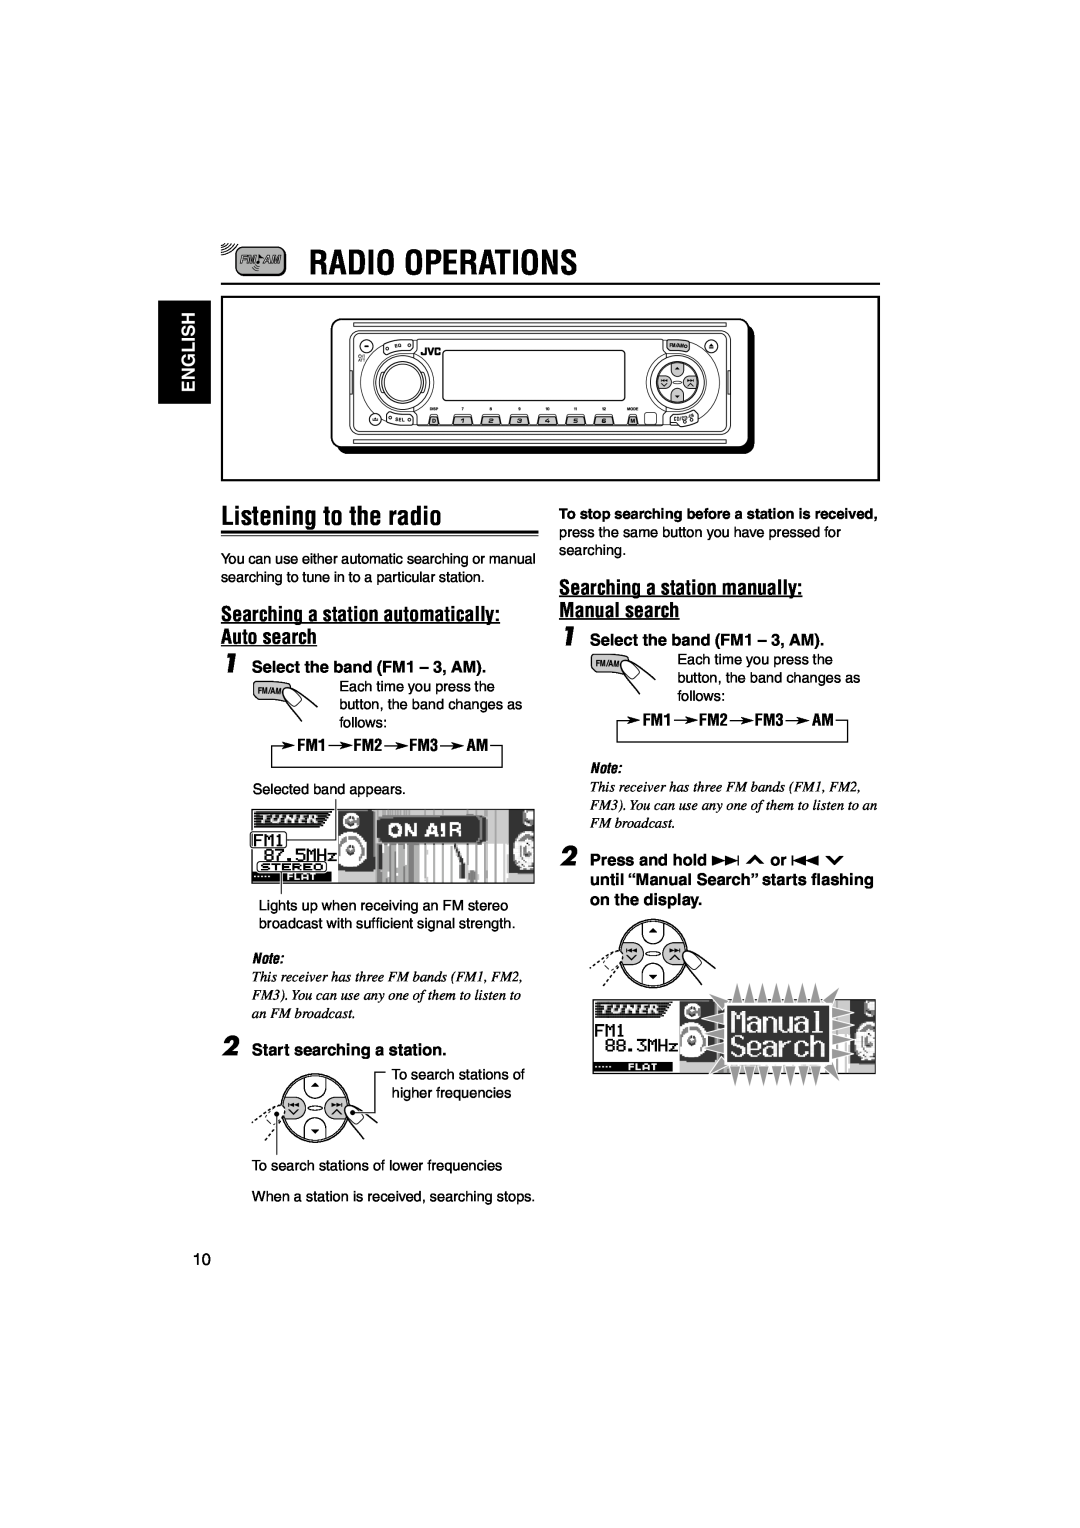 JVC KD-LH1150, KD-LH1100 Radio Operations, Listening to the radio, Searching a station automatically Auto search, English 